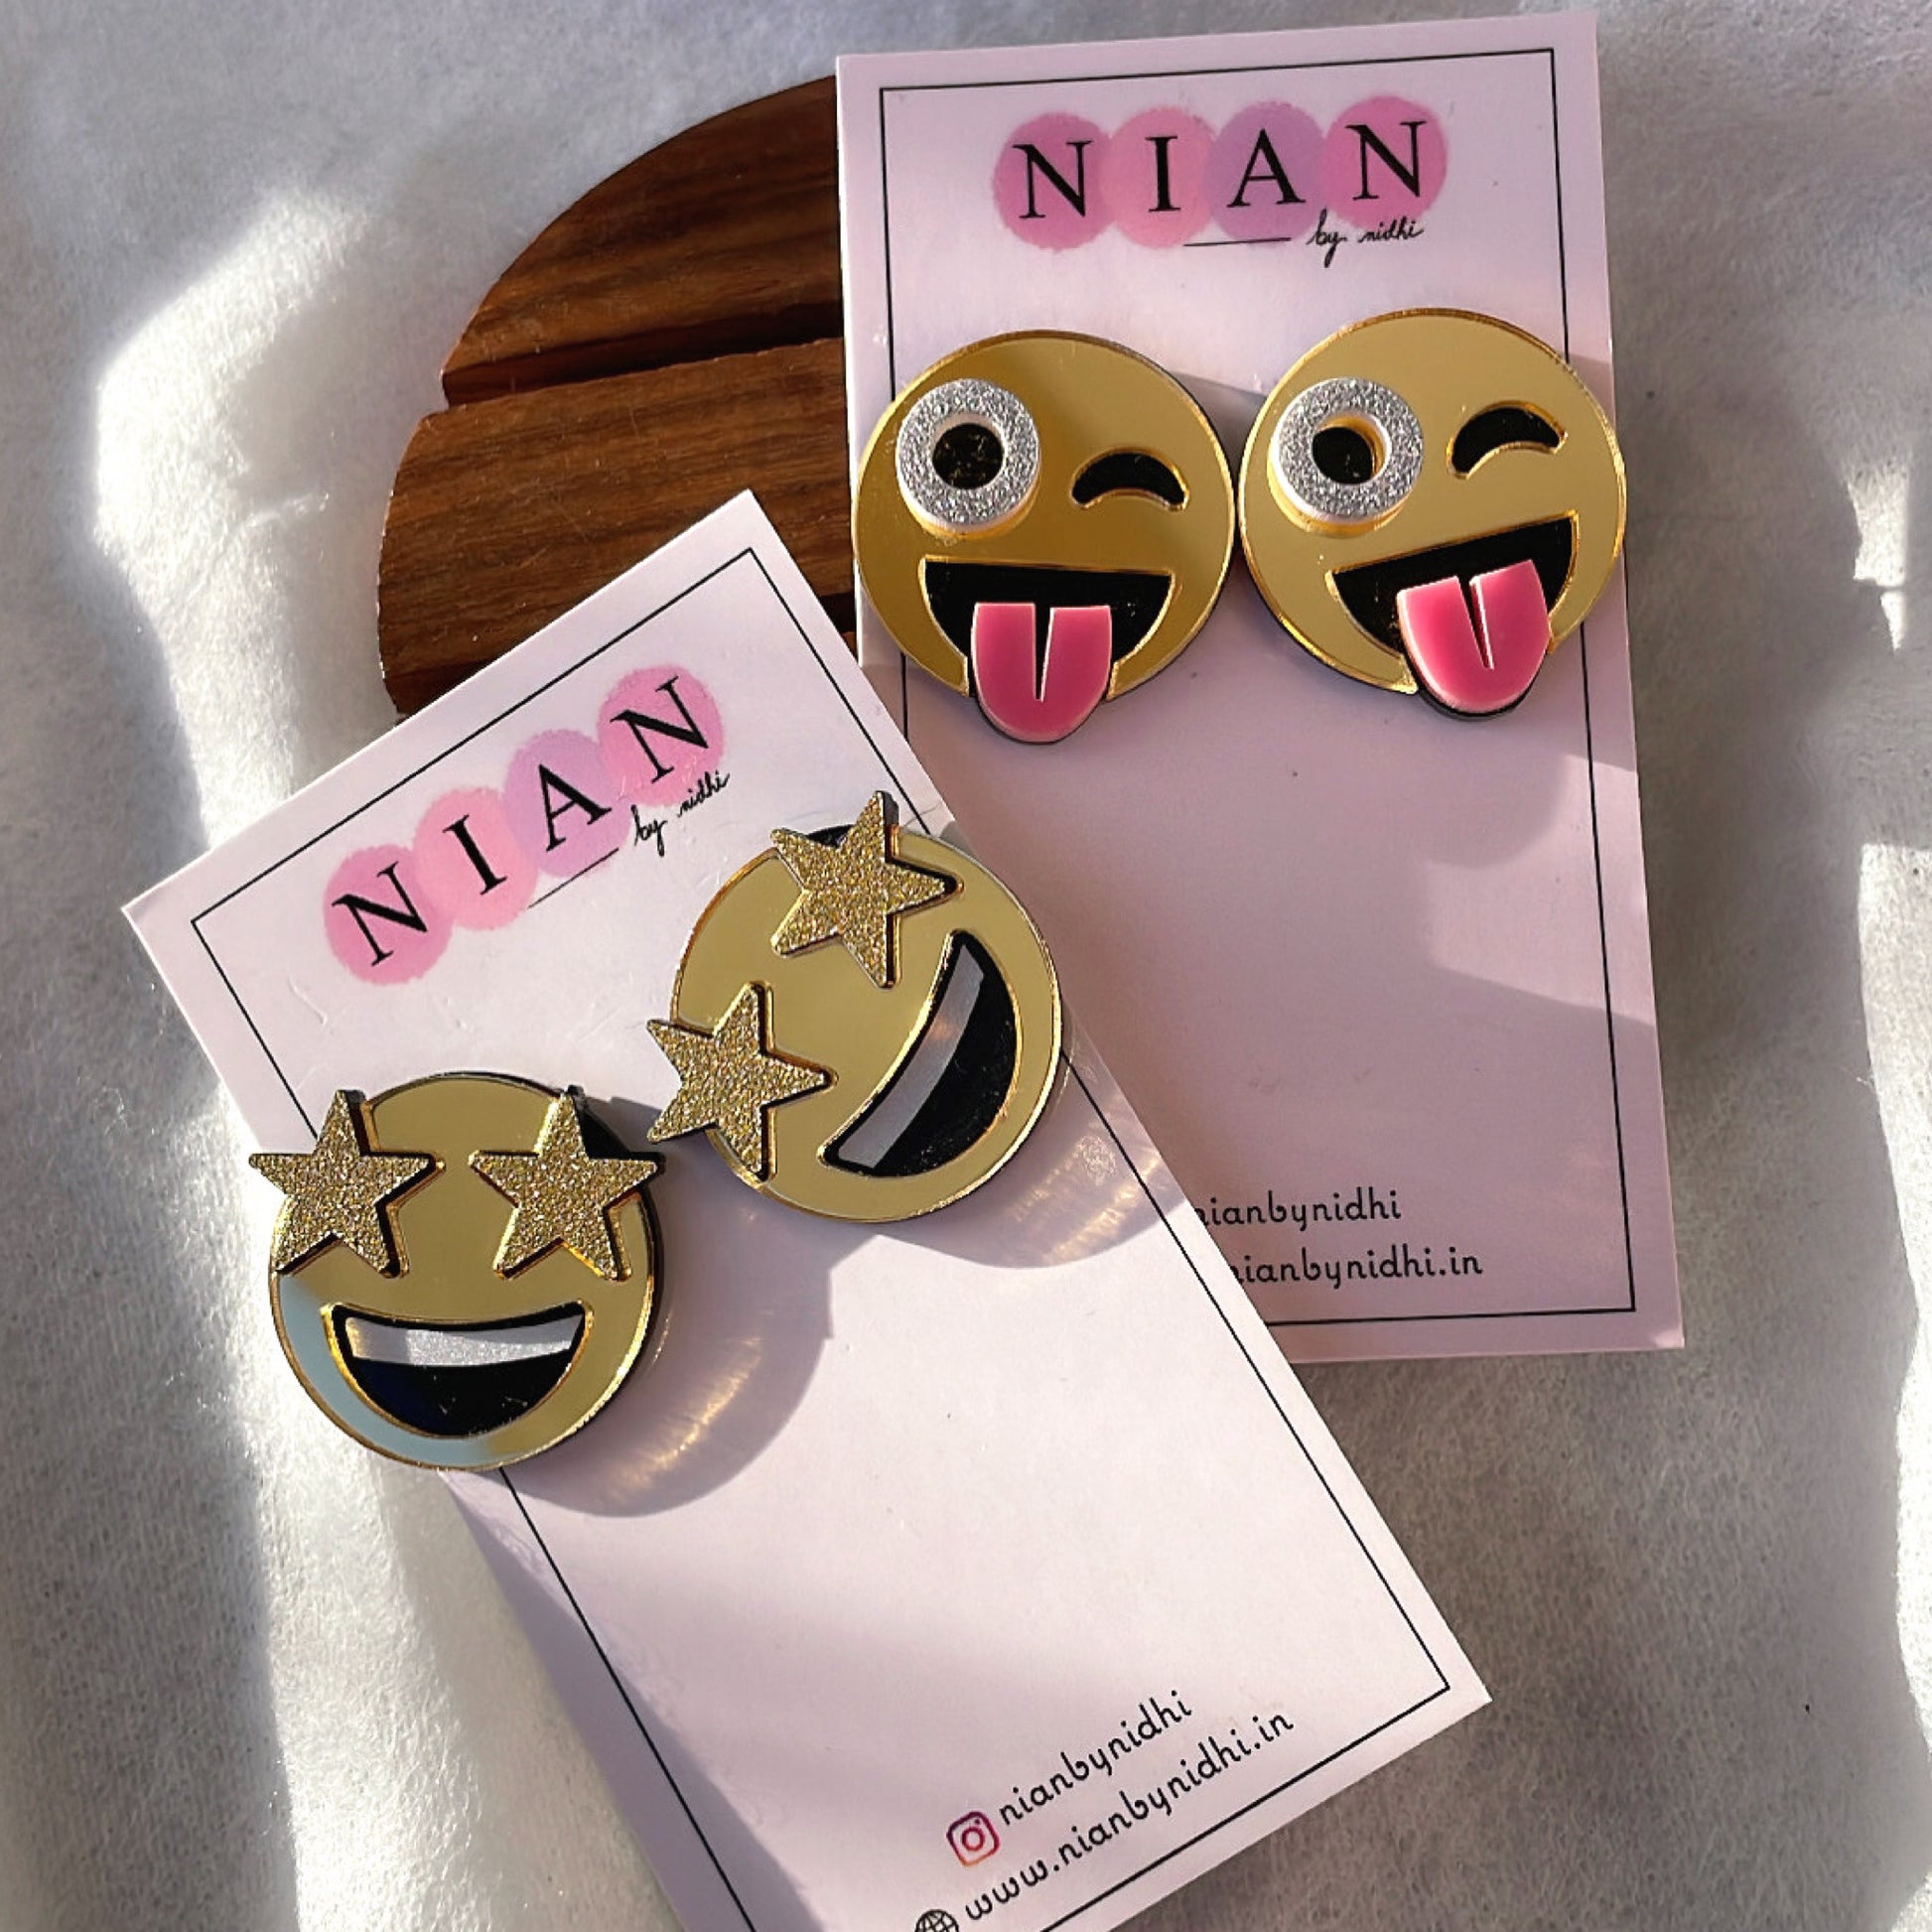 Emoji Studs Combo (Set of 2) - consists Goofy Emoji Studs and Star-Struck Emoji Studs - Golden with face detailings - Nian by Nidhi - placed in a white and brown background